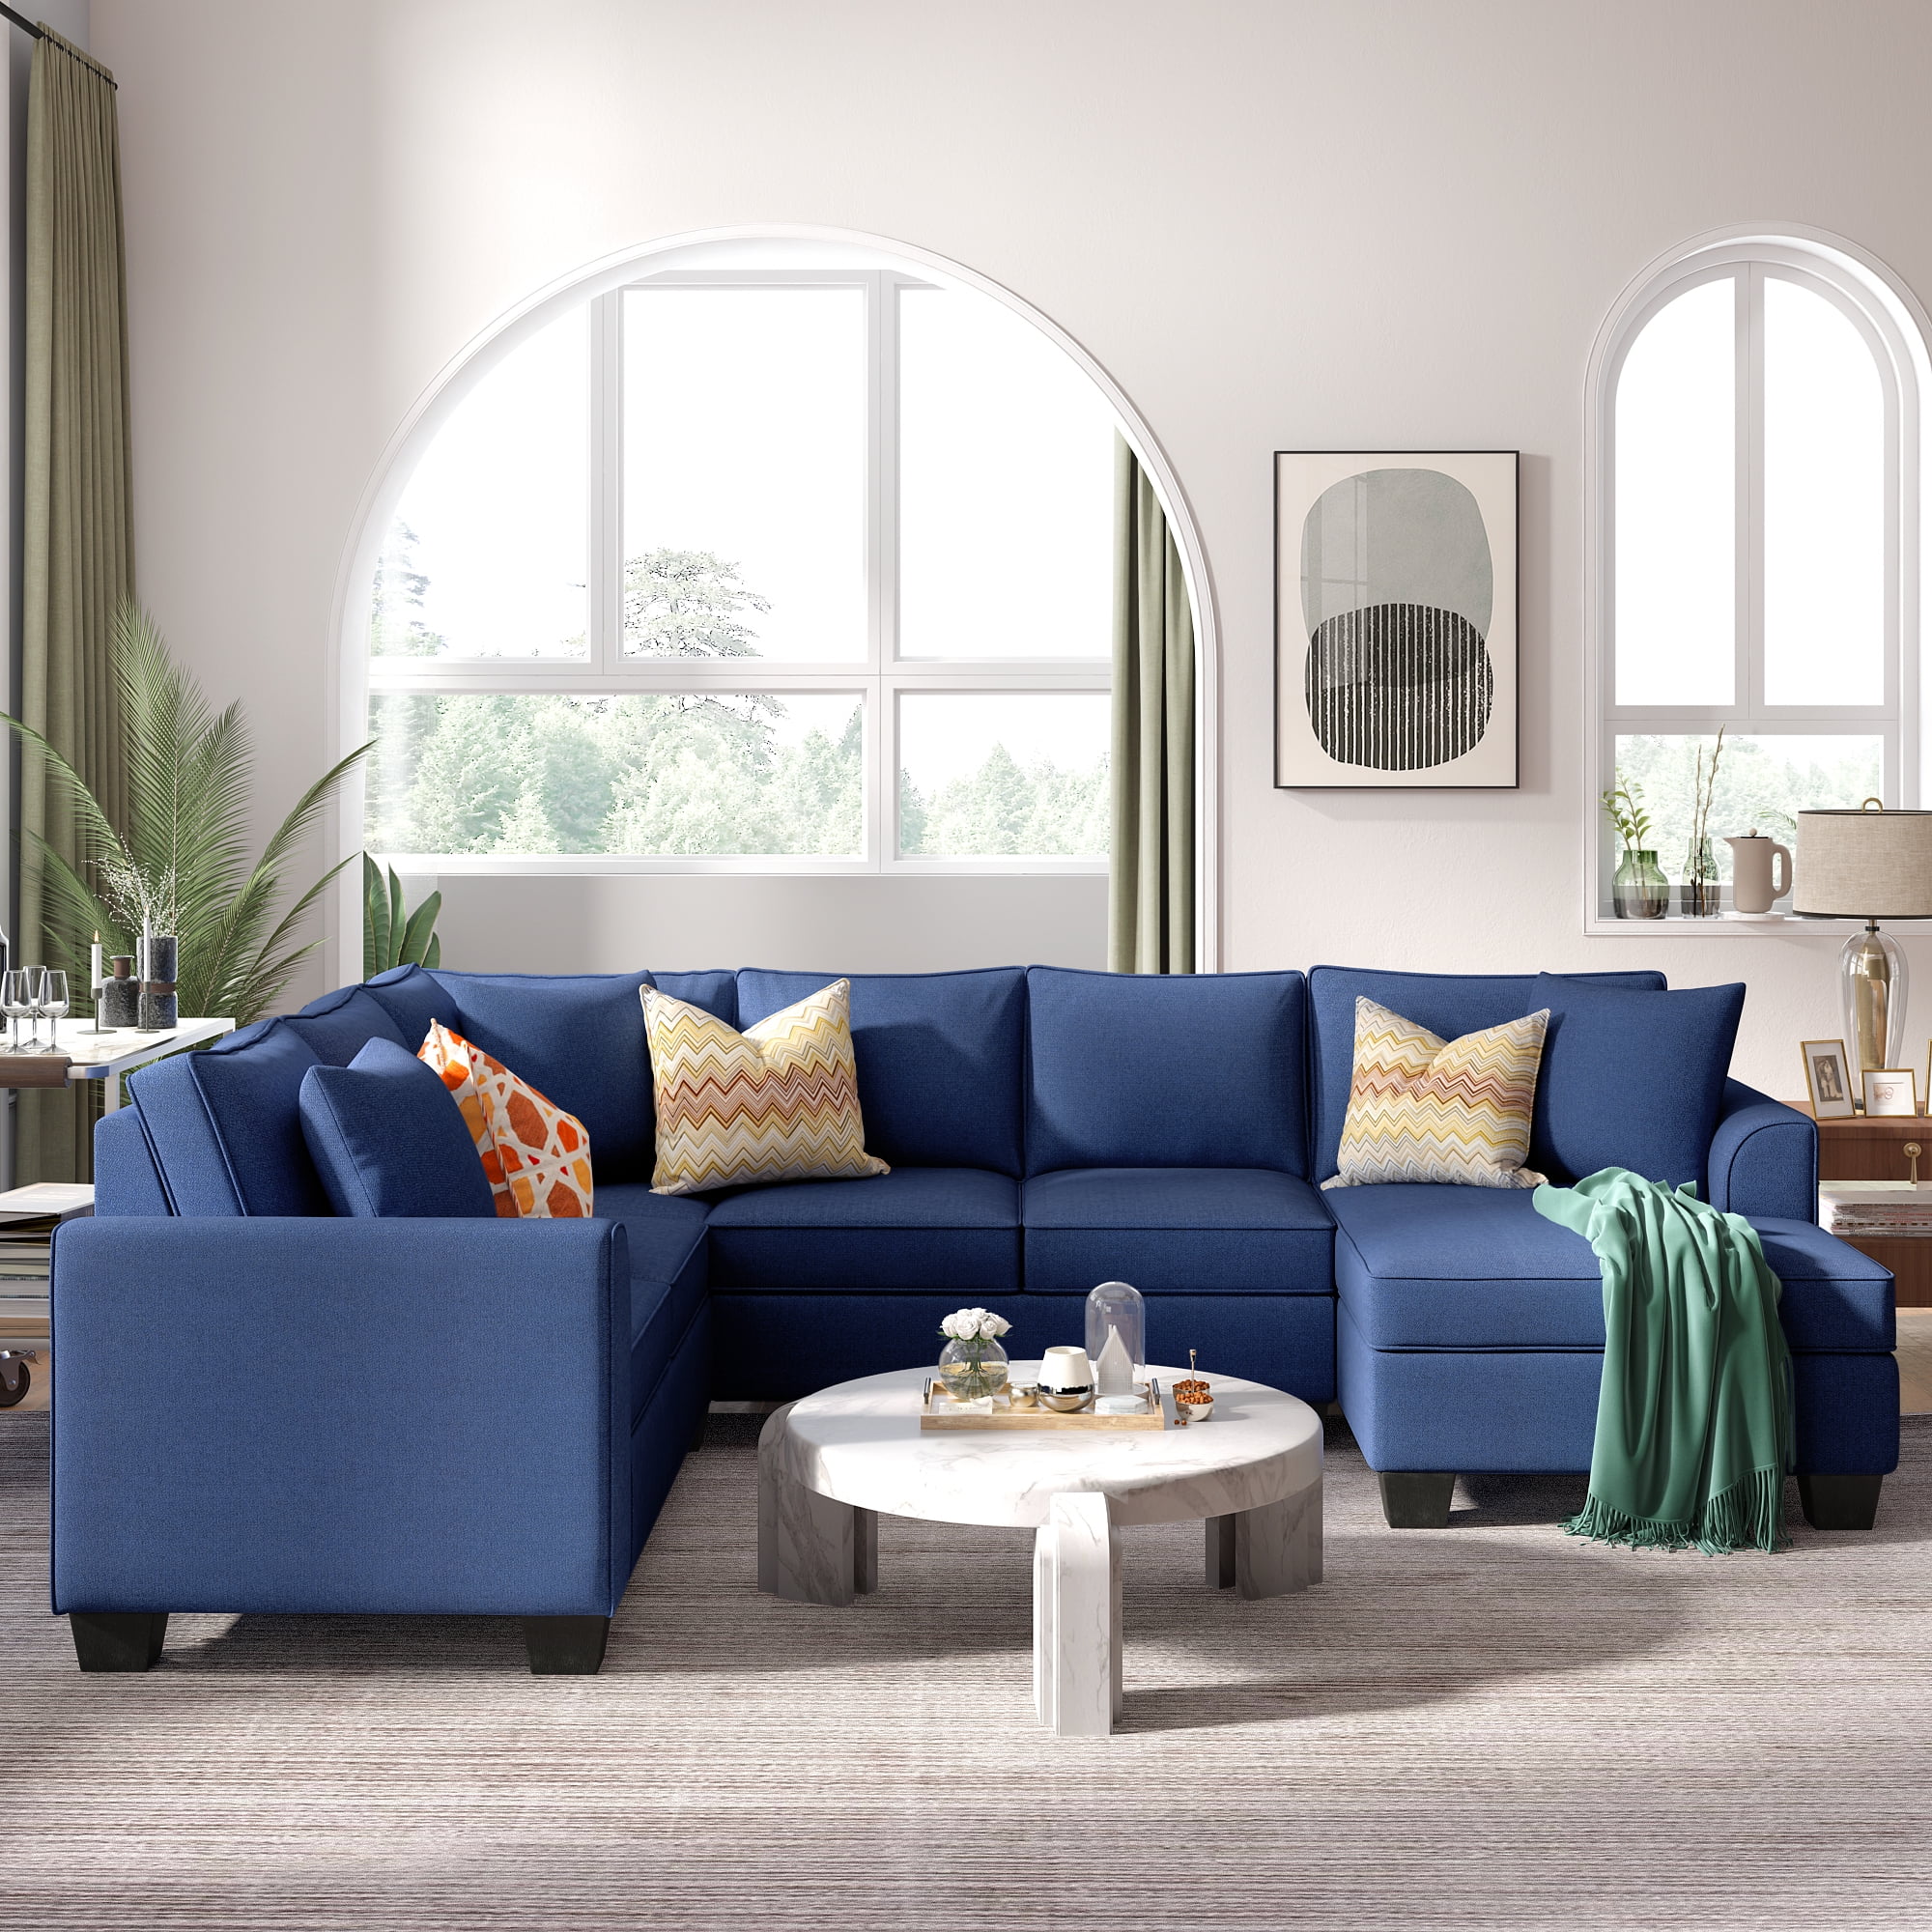 Details about   Modern Contemporary Sectionals Leather sofa furniture Fabric couch In 7 Colors 